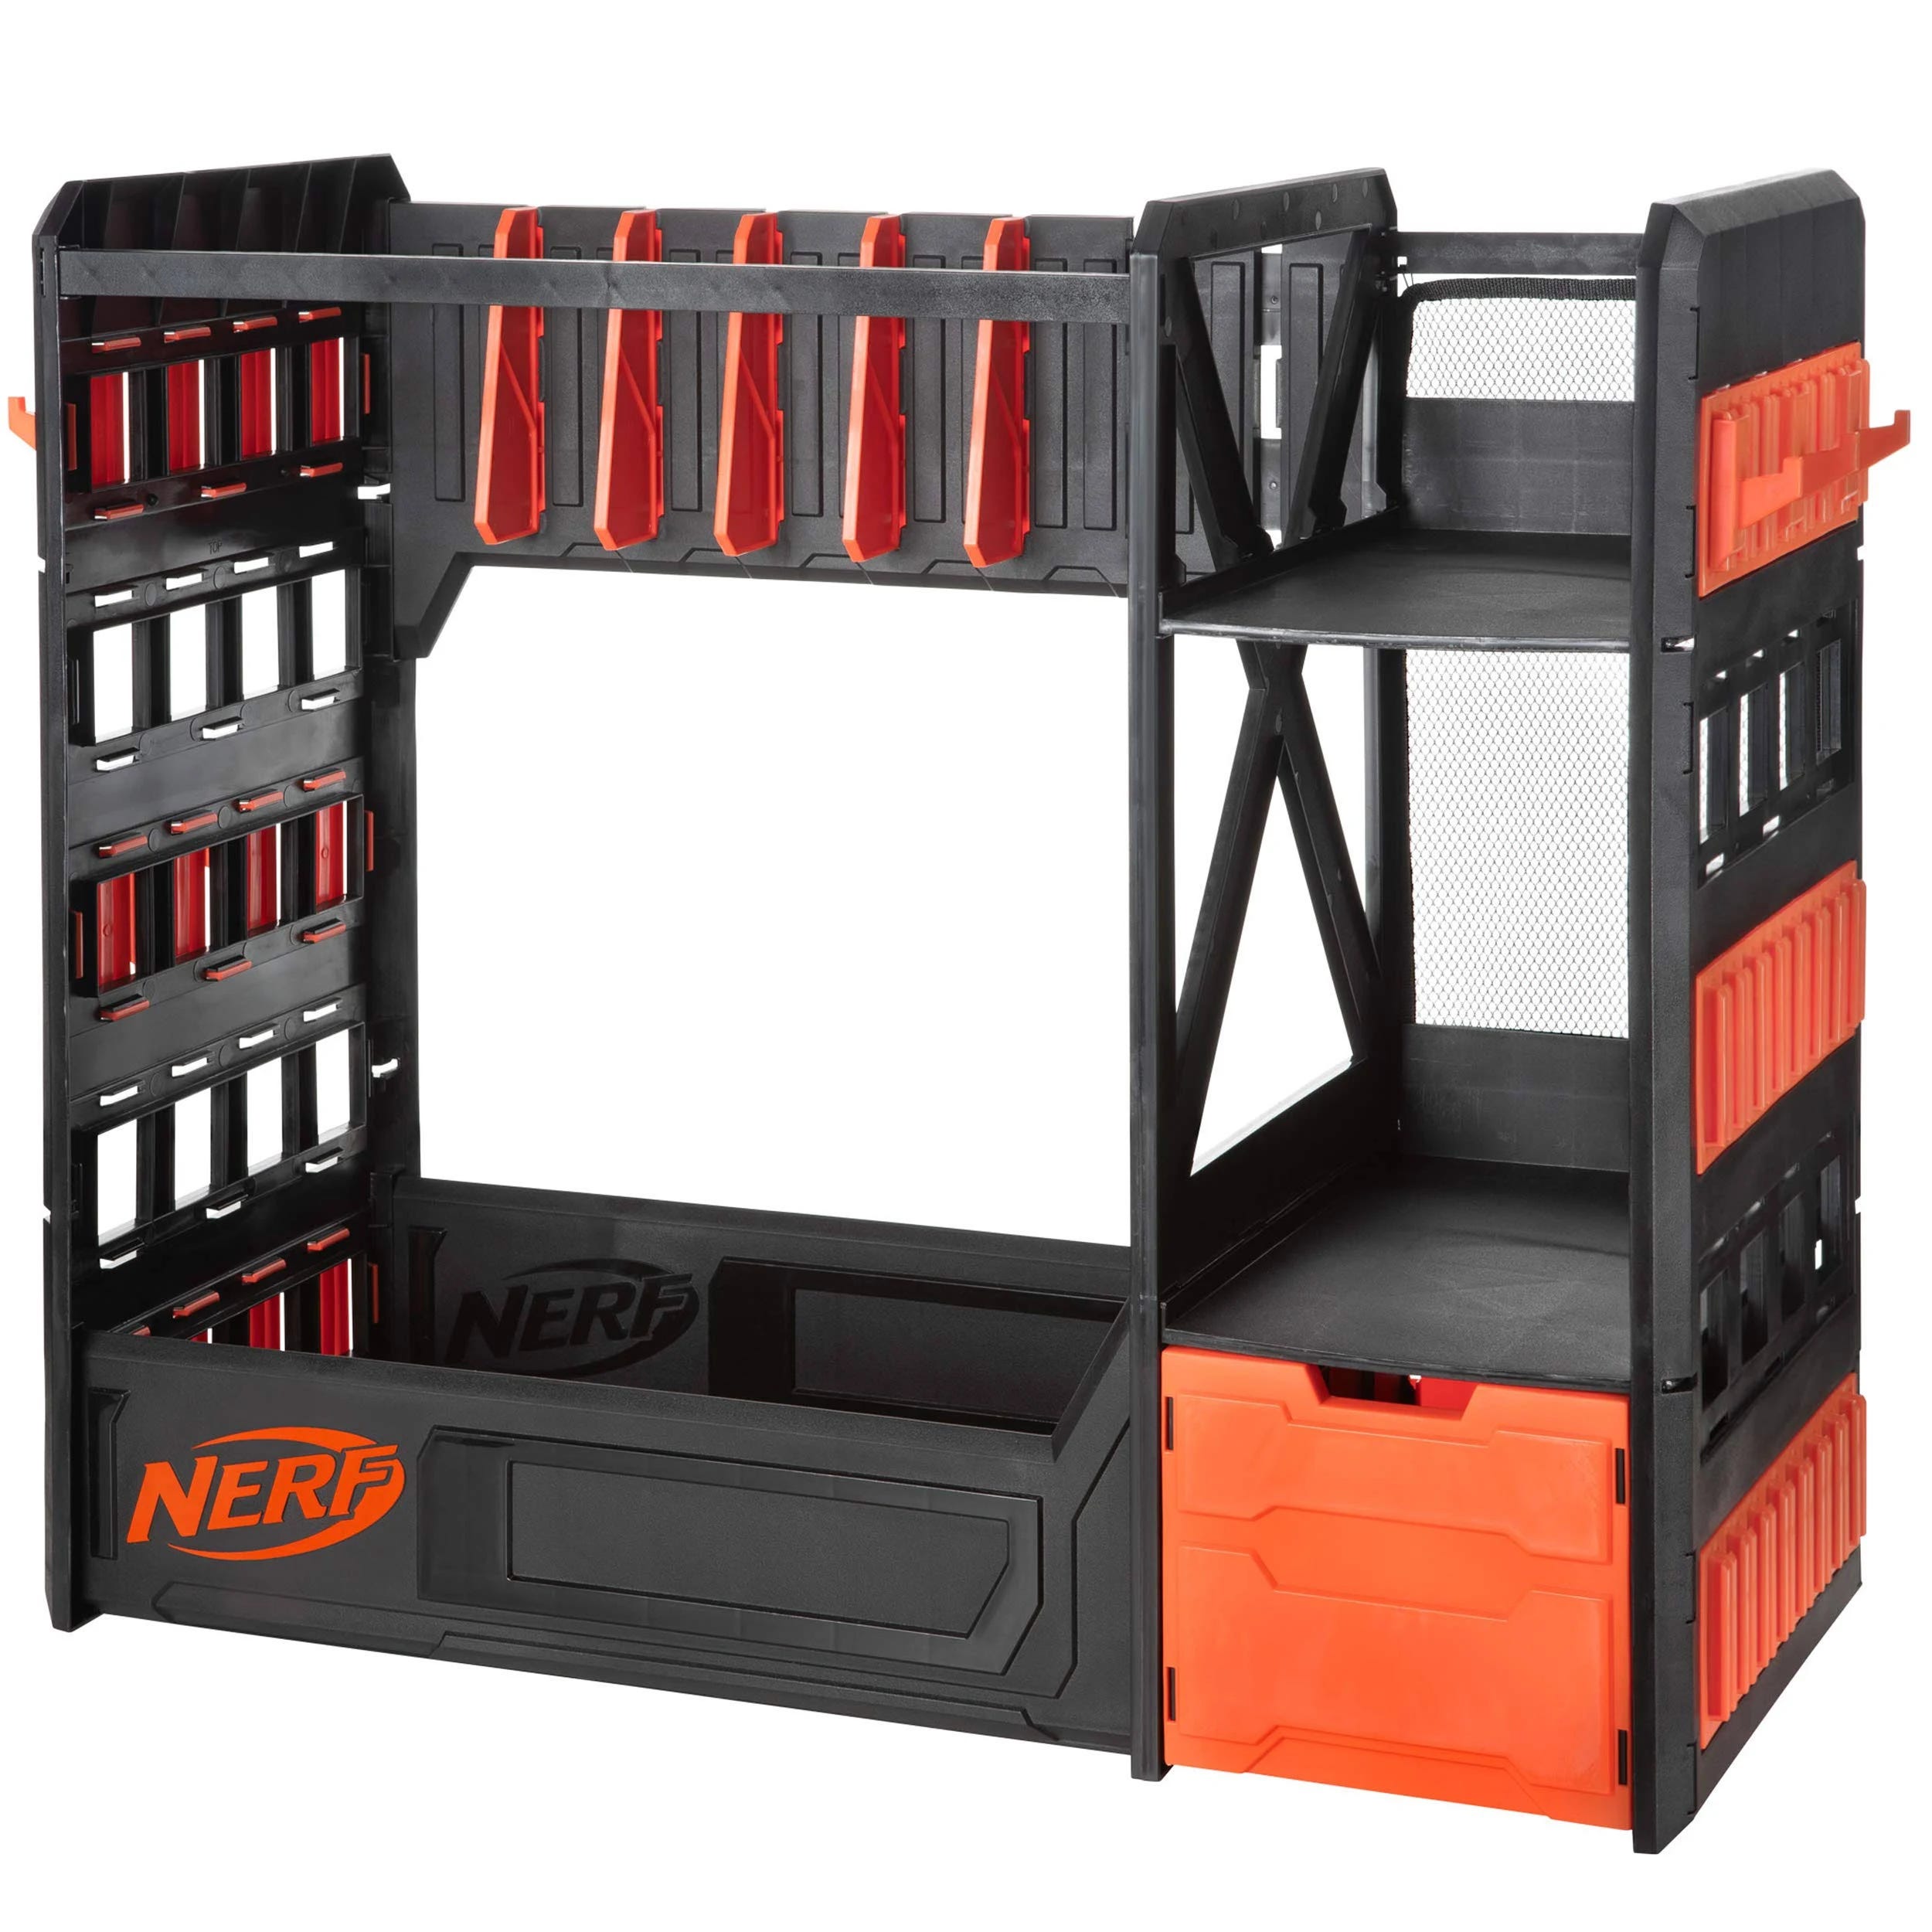 Organize Your Nerf Gear with the Elite Blaster Rack | Image